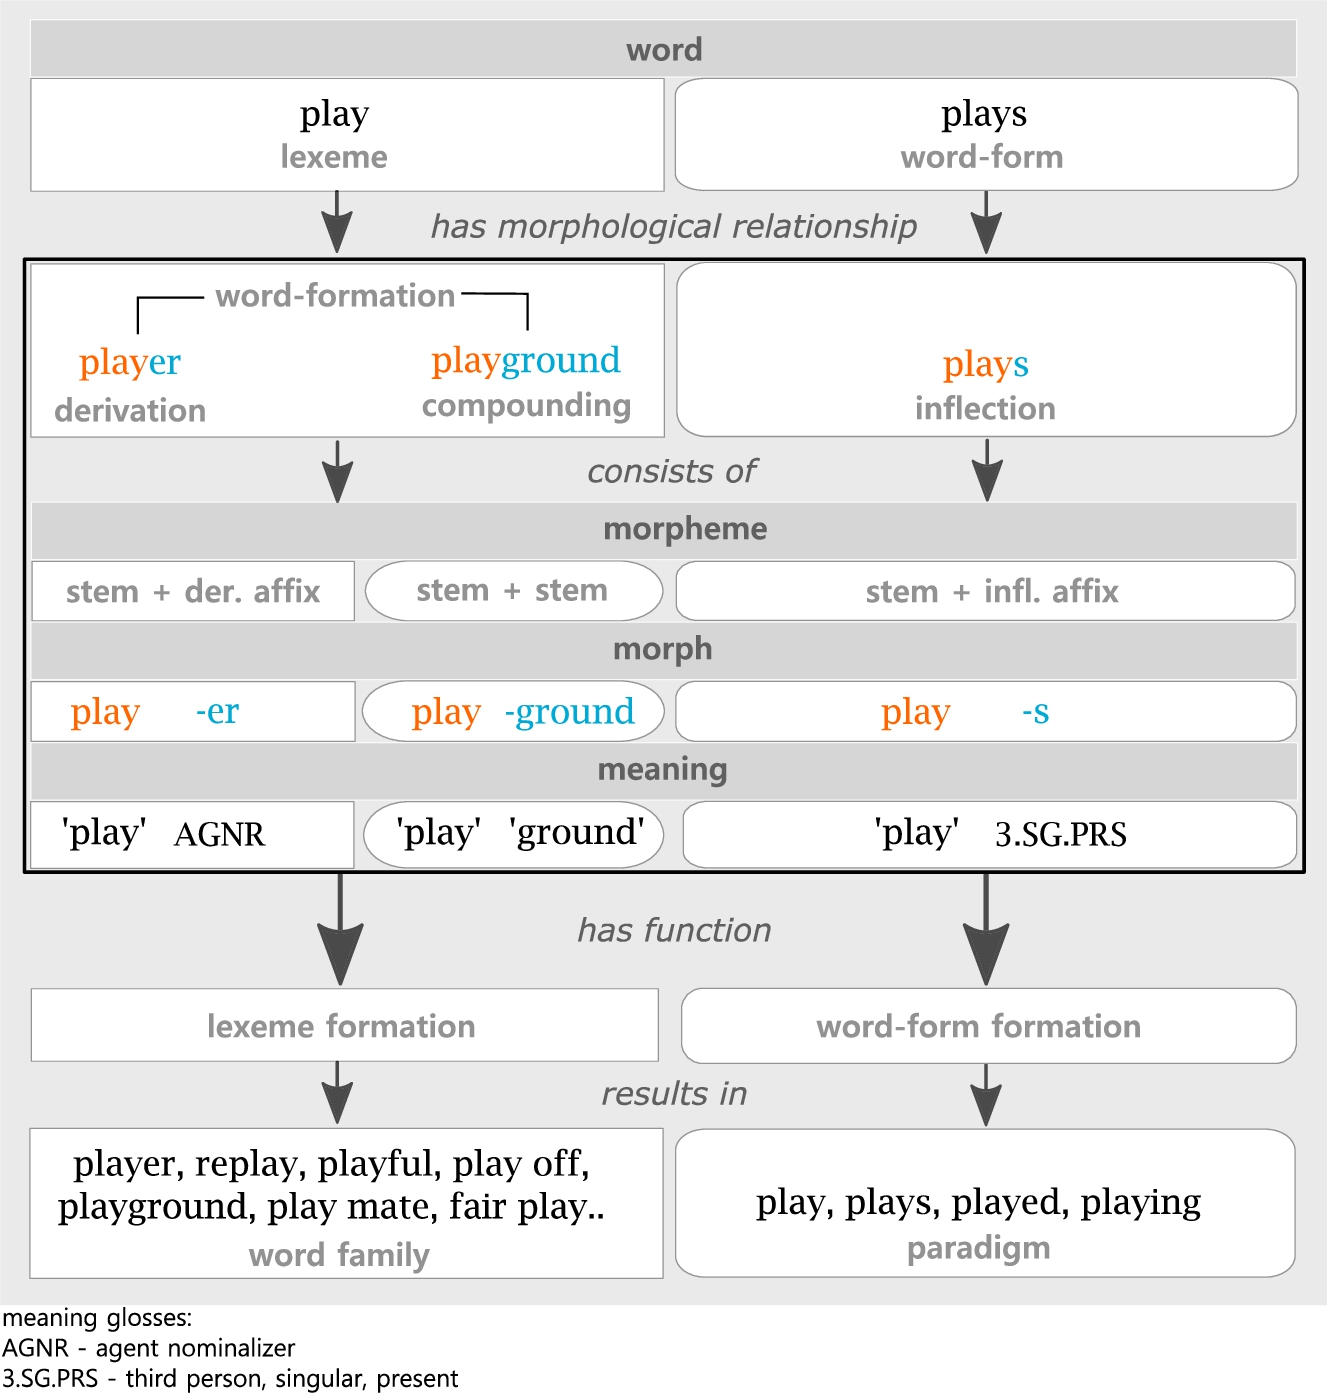 Overview of the linguistic domain of morphology with the English example lexeme play (verb).